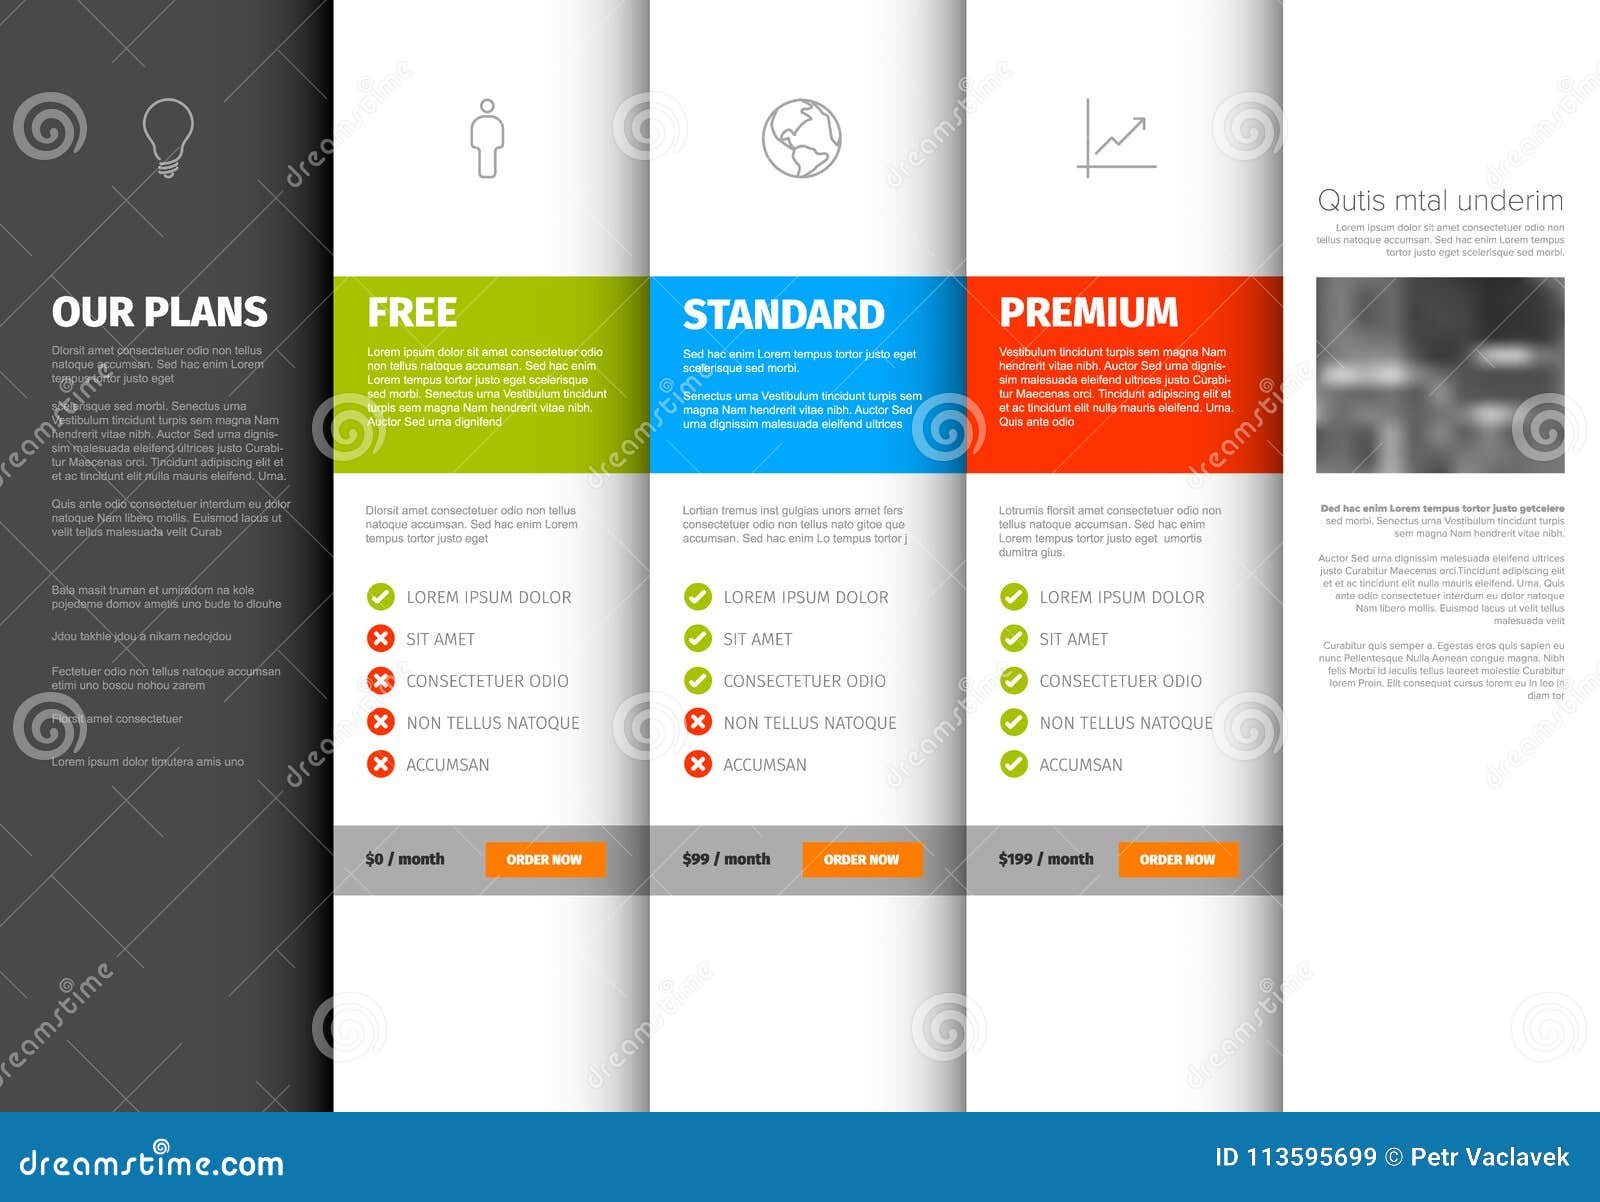 product / service pricing comparison table template